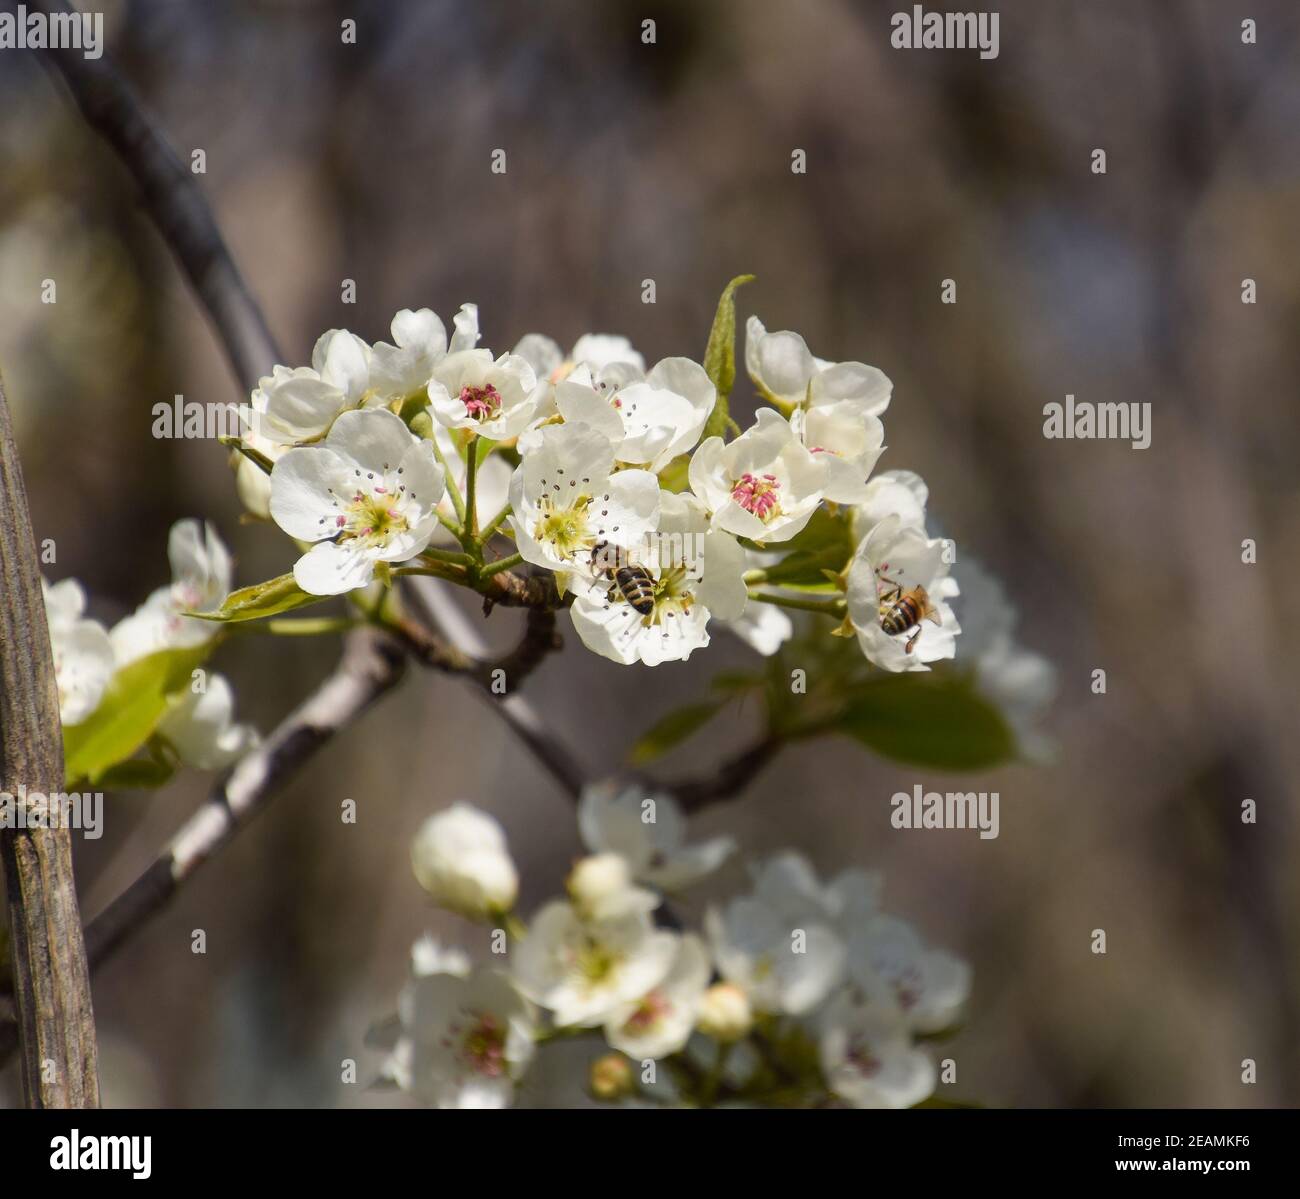 Pollination of flowers by bees pears. Stock Photo